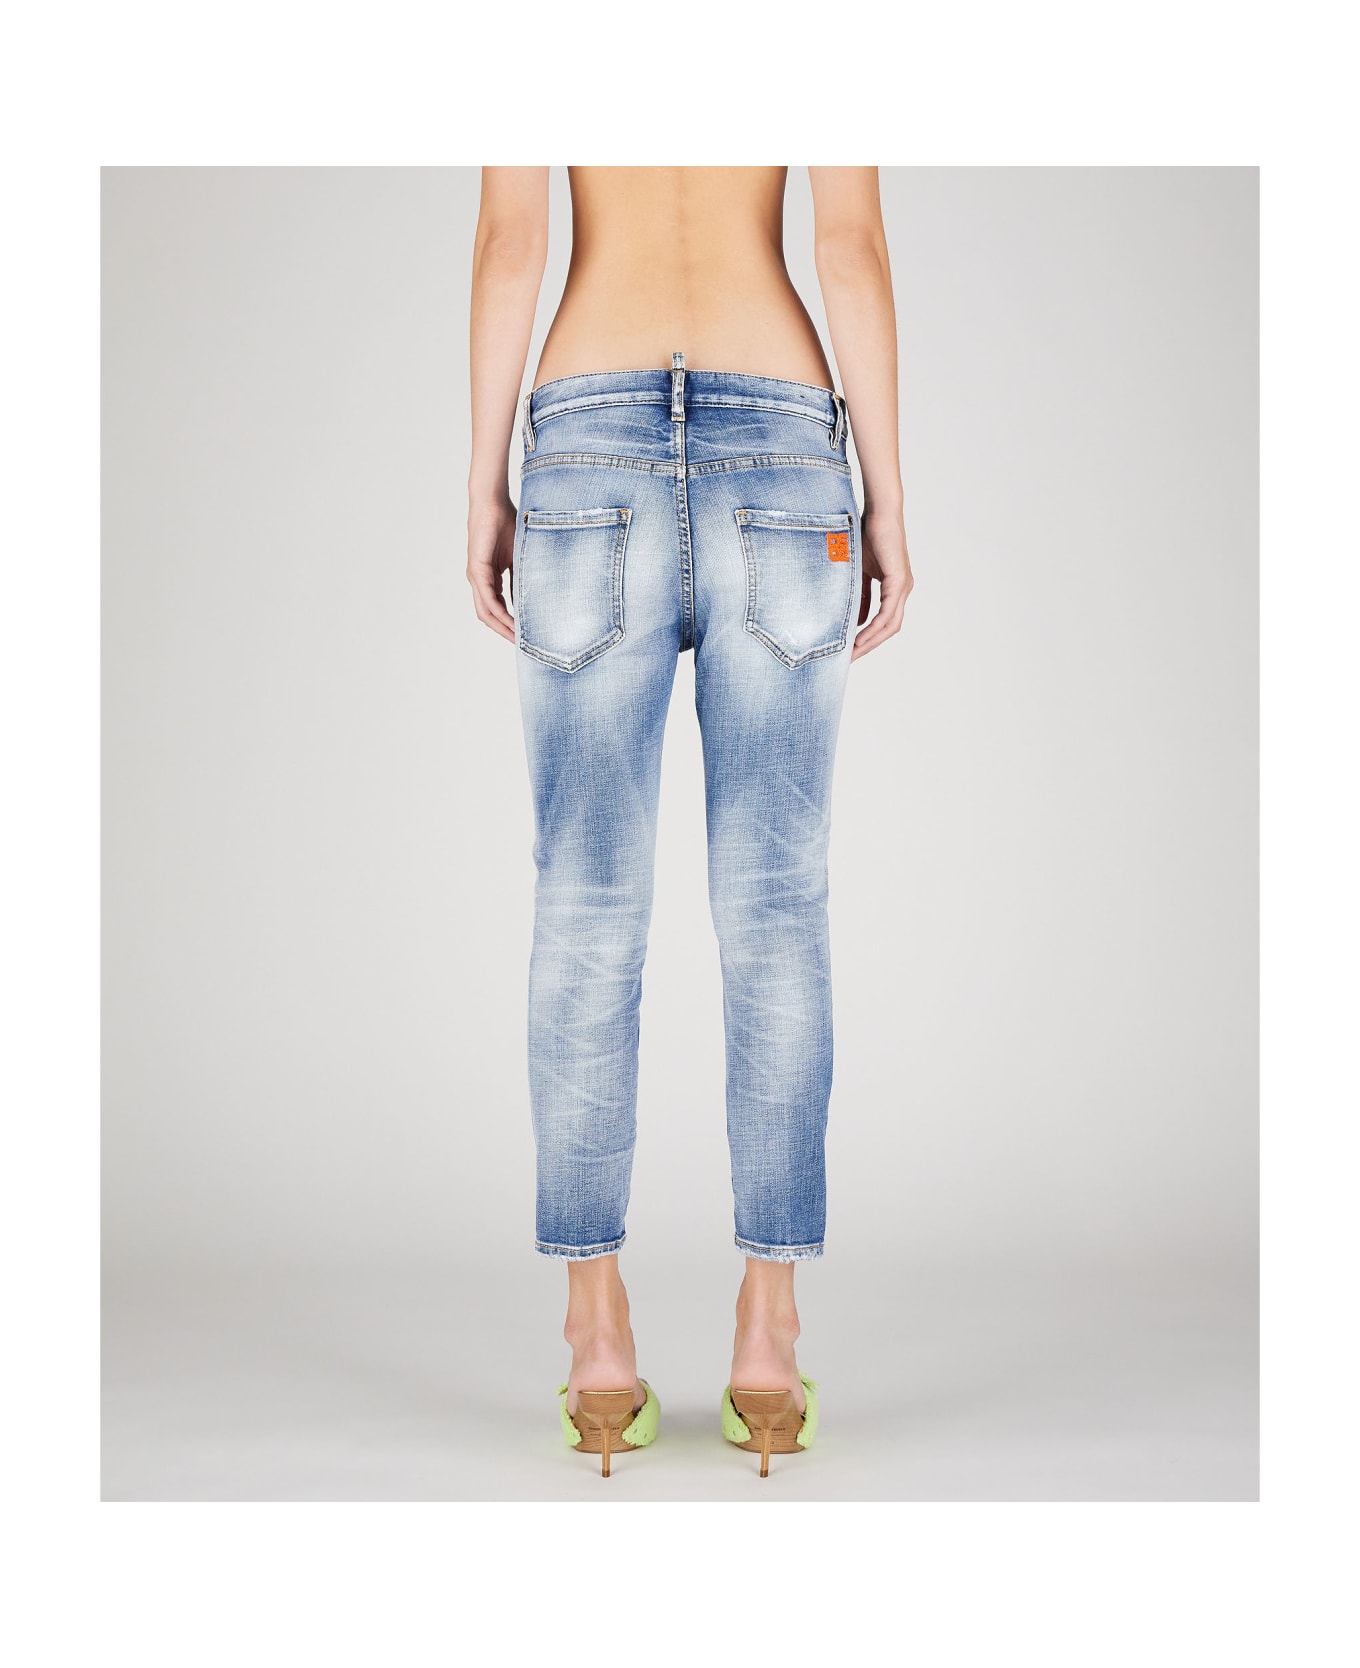 Dsquared2 'cool Girl Cropped' Jeans - Navy blue